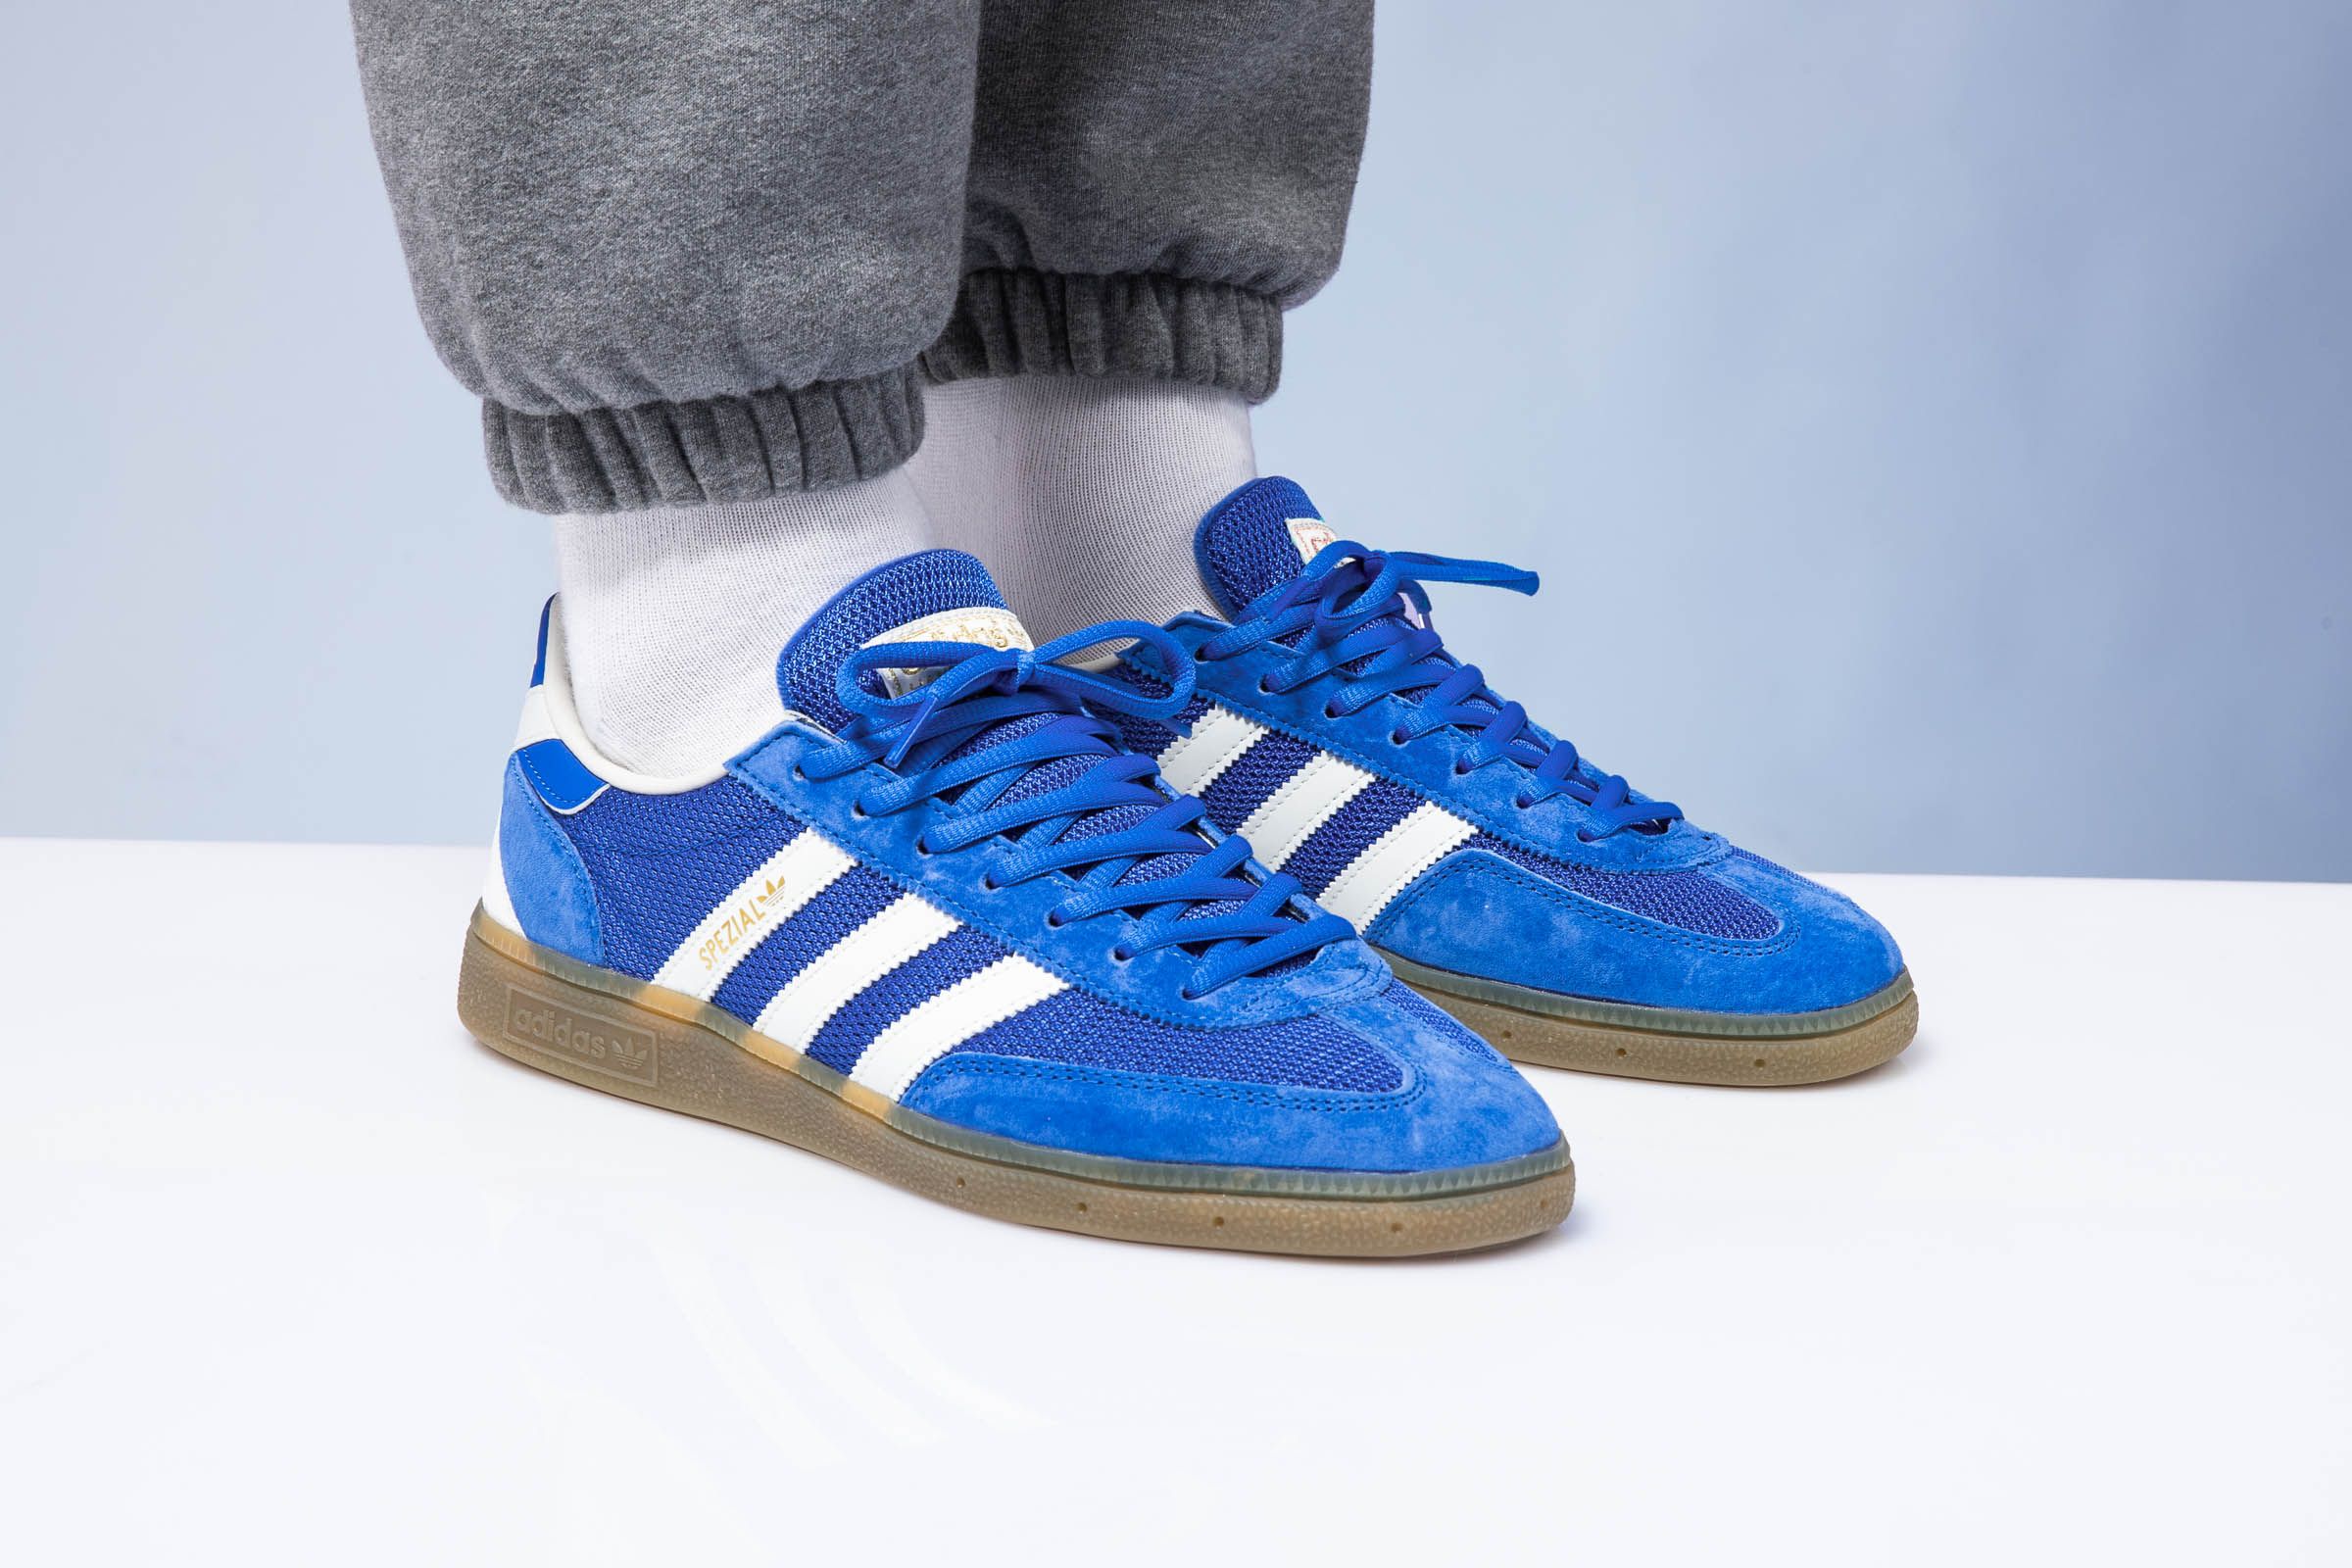 Titolo on Twitter: "First produced 1979 the Handball Spezial returns in blue/white colorway. get yours ➡️https://t.co/3dJjE0VgNs UK 6.5 (40) - UK 10.5 (45 1/3) code EE5728 #adidas #adidashandballspezial #